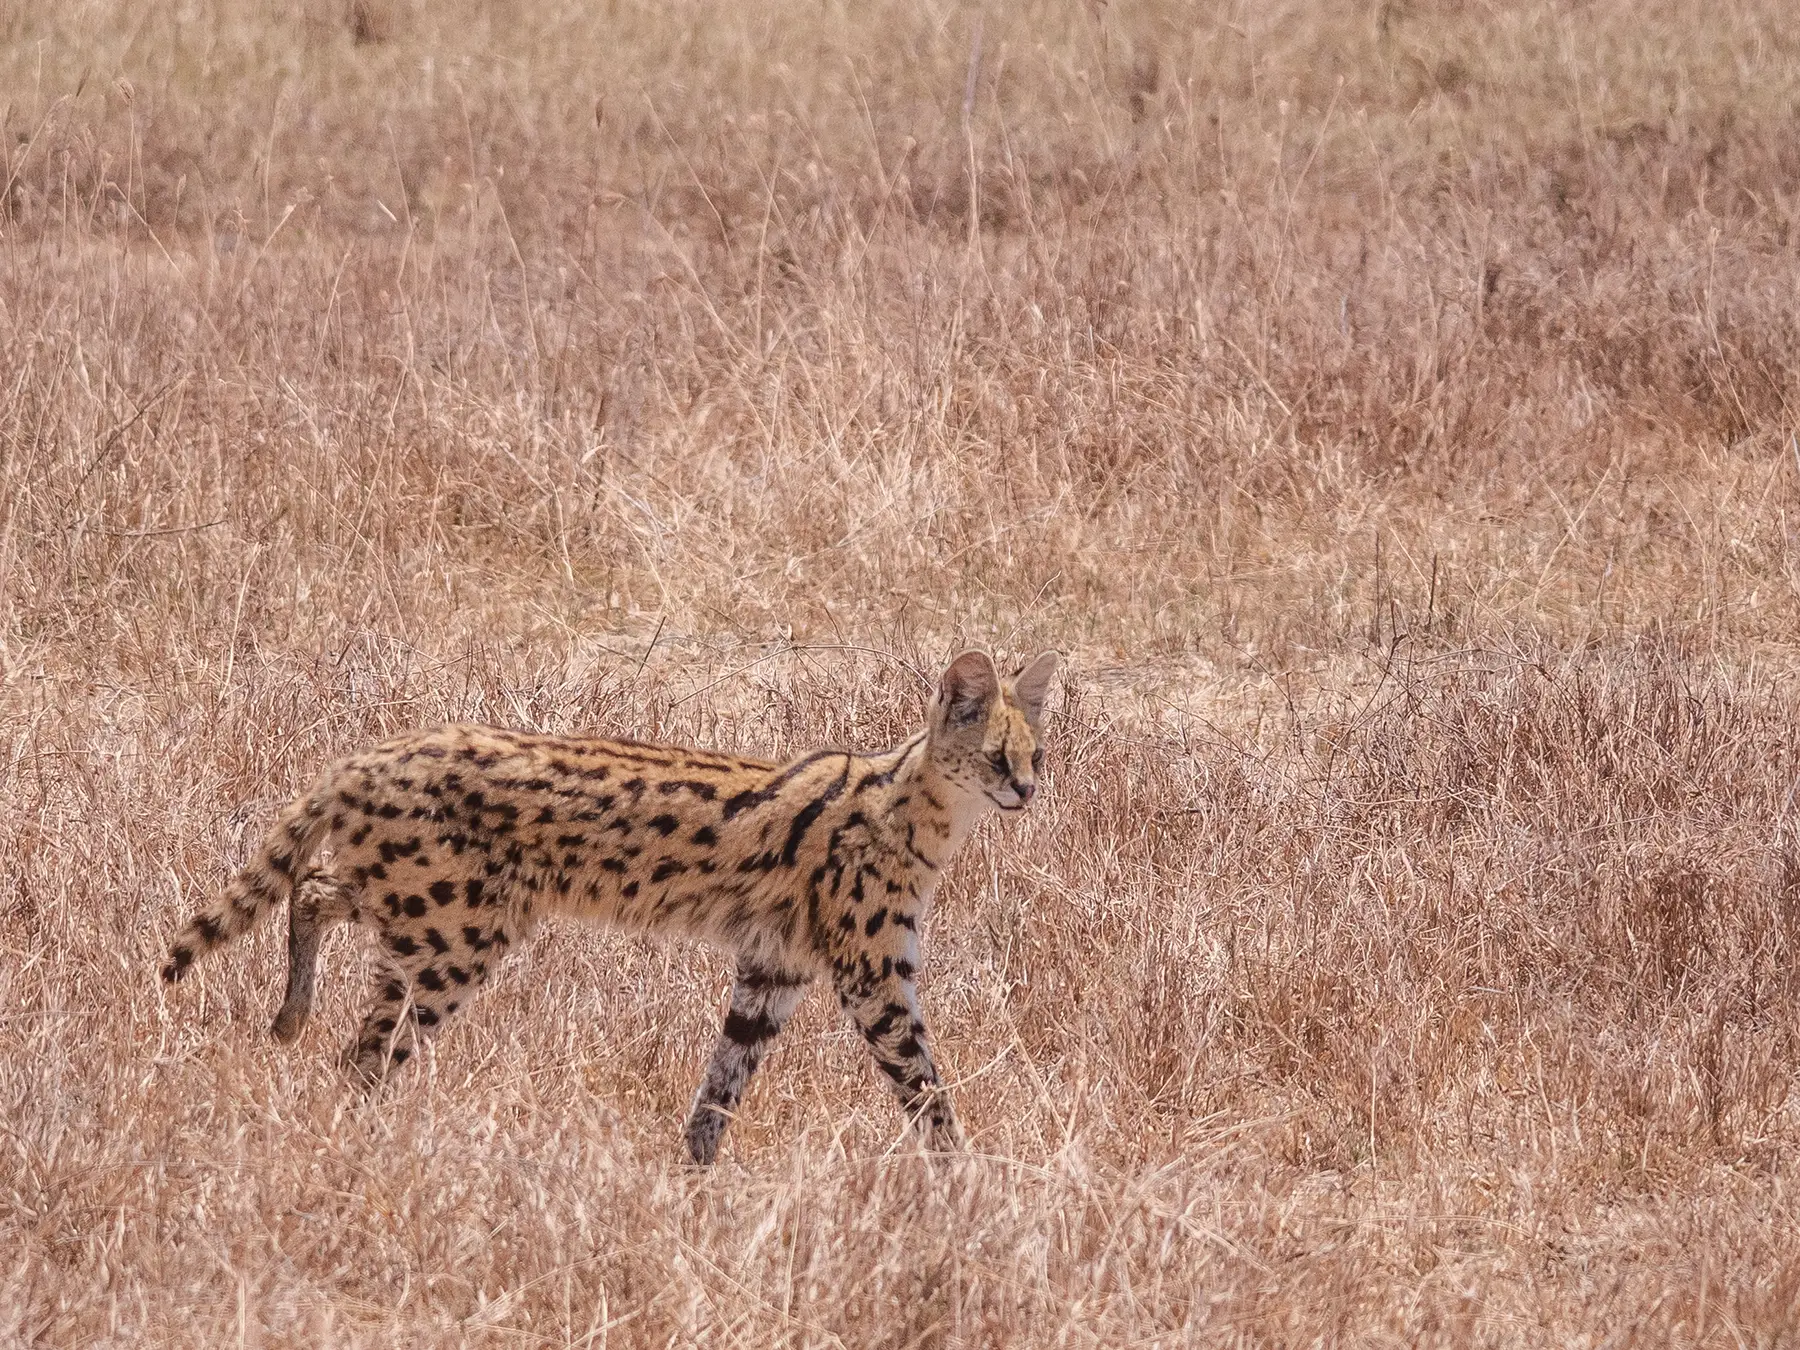 Lone Serval in Ngorongoro Crater